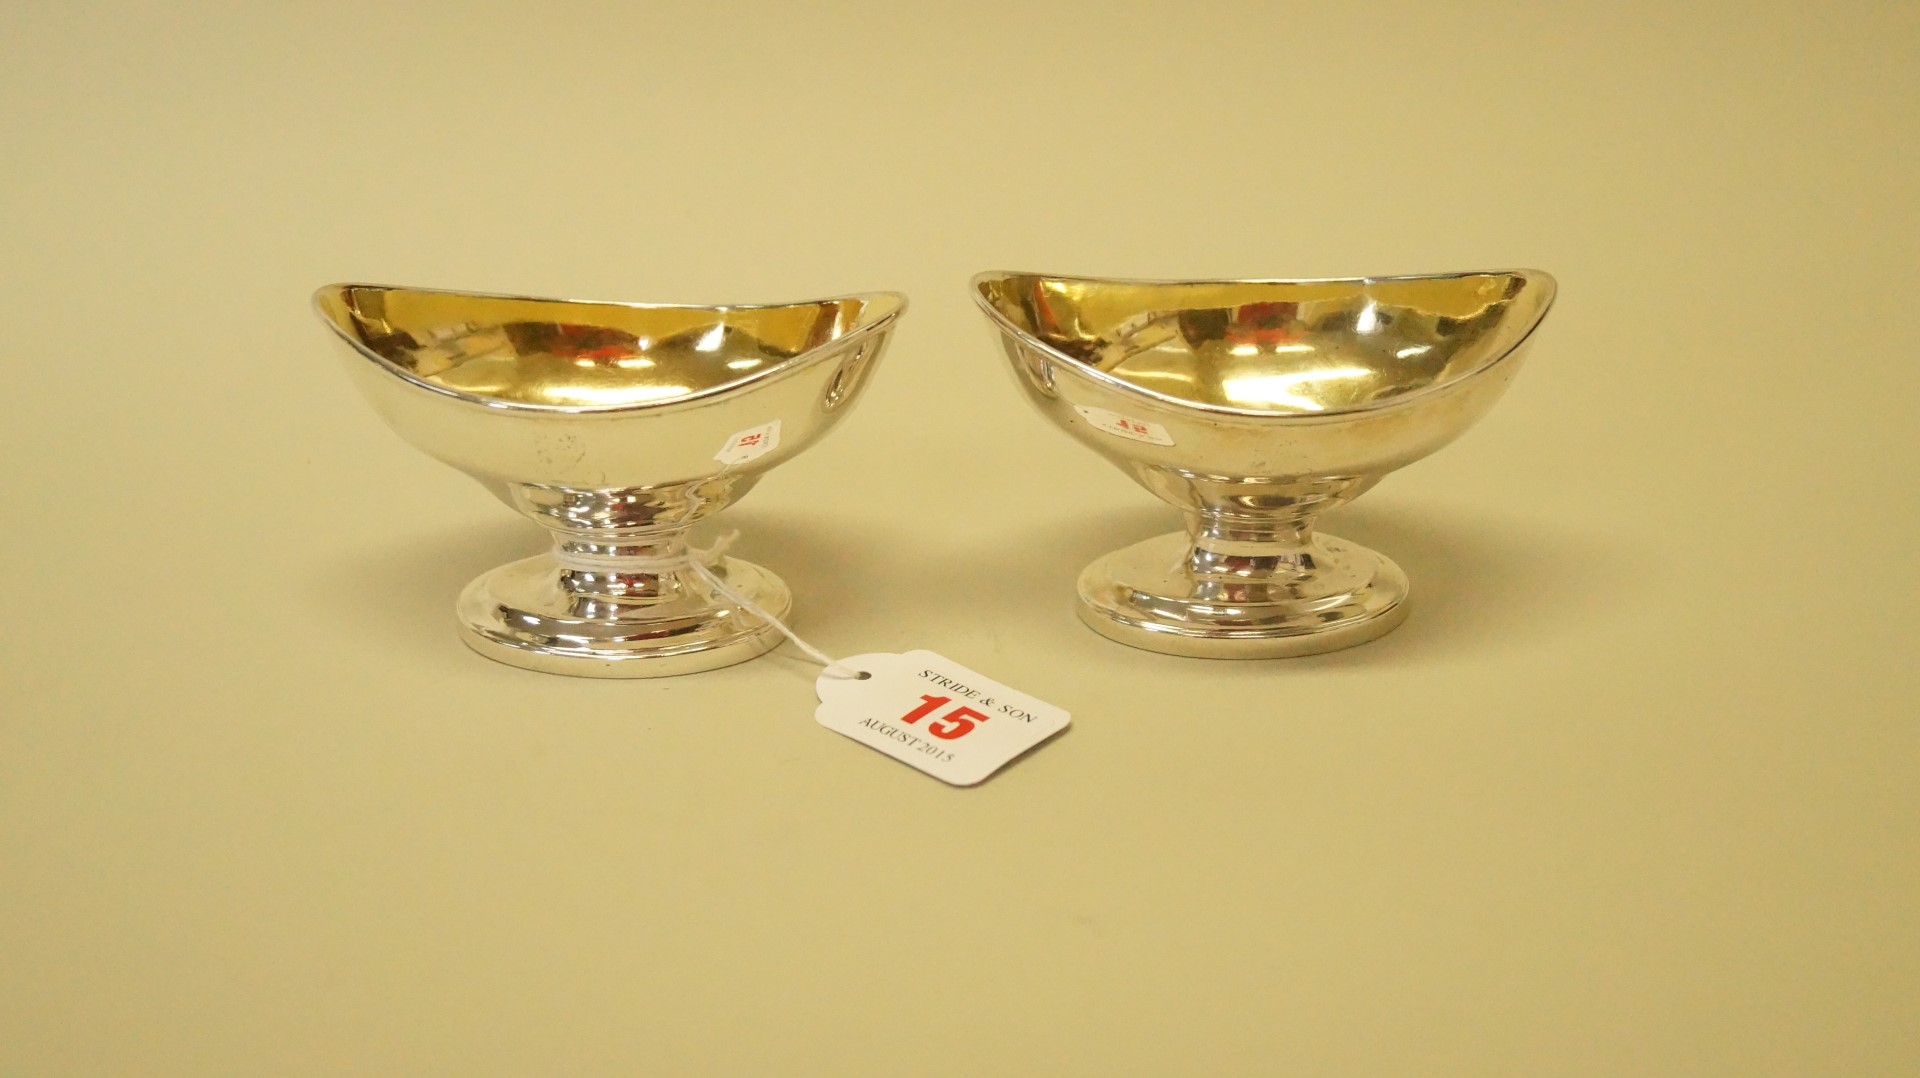 A pair of George III silver oval footed salts, possibly by Thomas Hemming, London 1784, gilt lined,